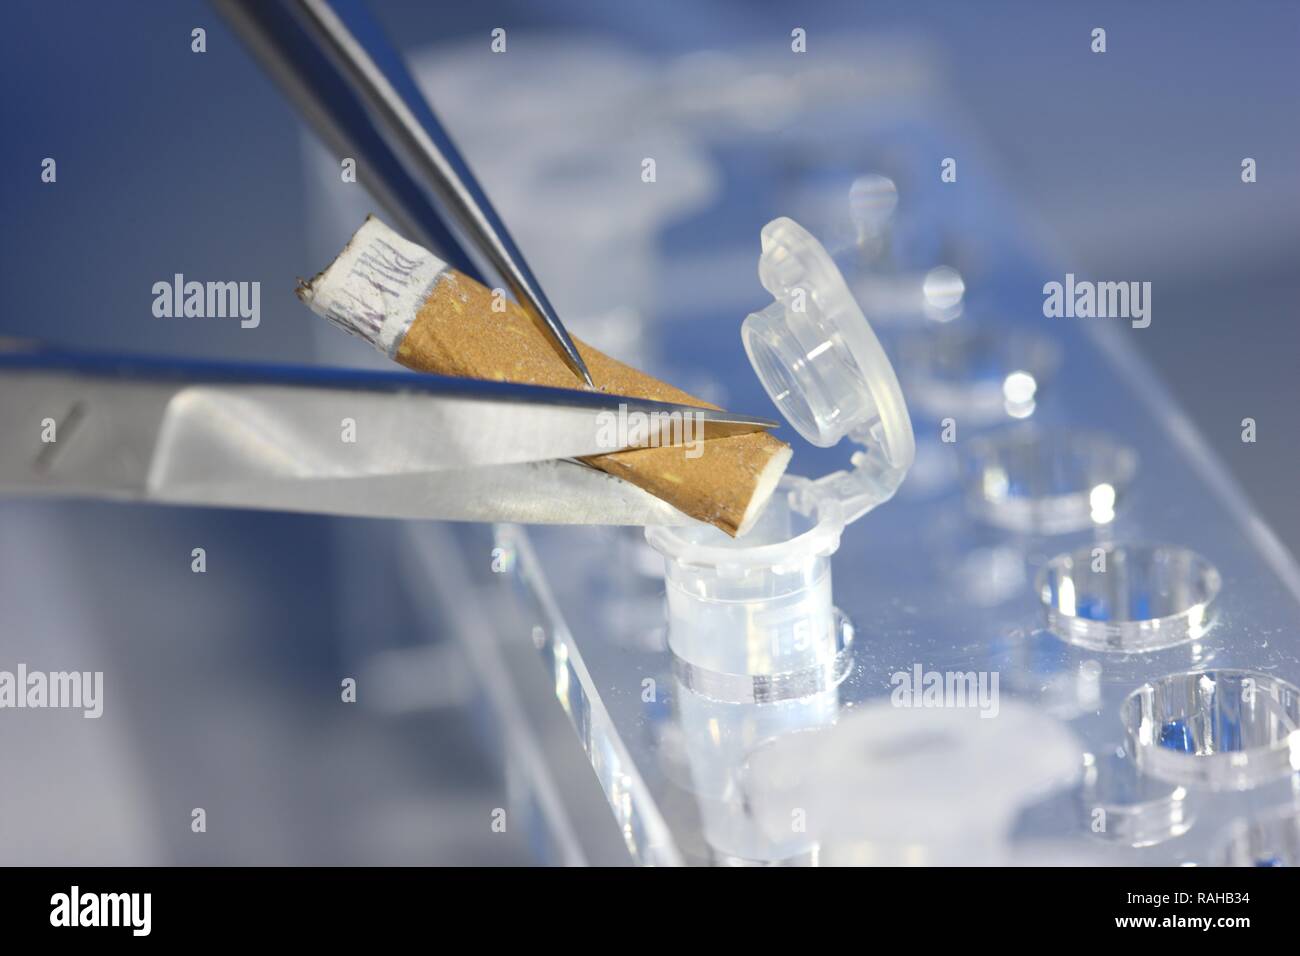 Kriminaltechnisches Institut, KTI, Forensic Science Institute, DNA analysis, trace carriers are examined for DNA evidence Stock Photo